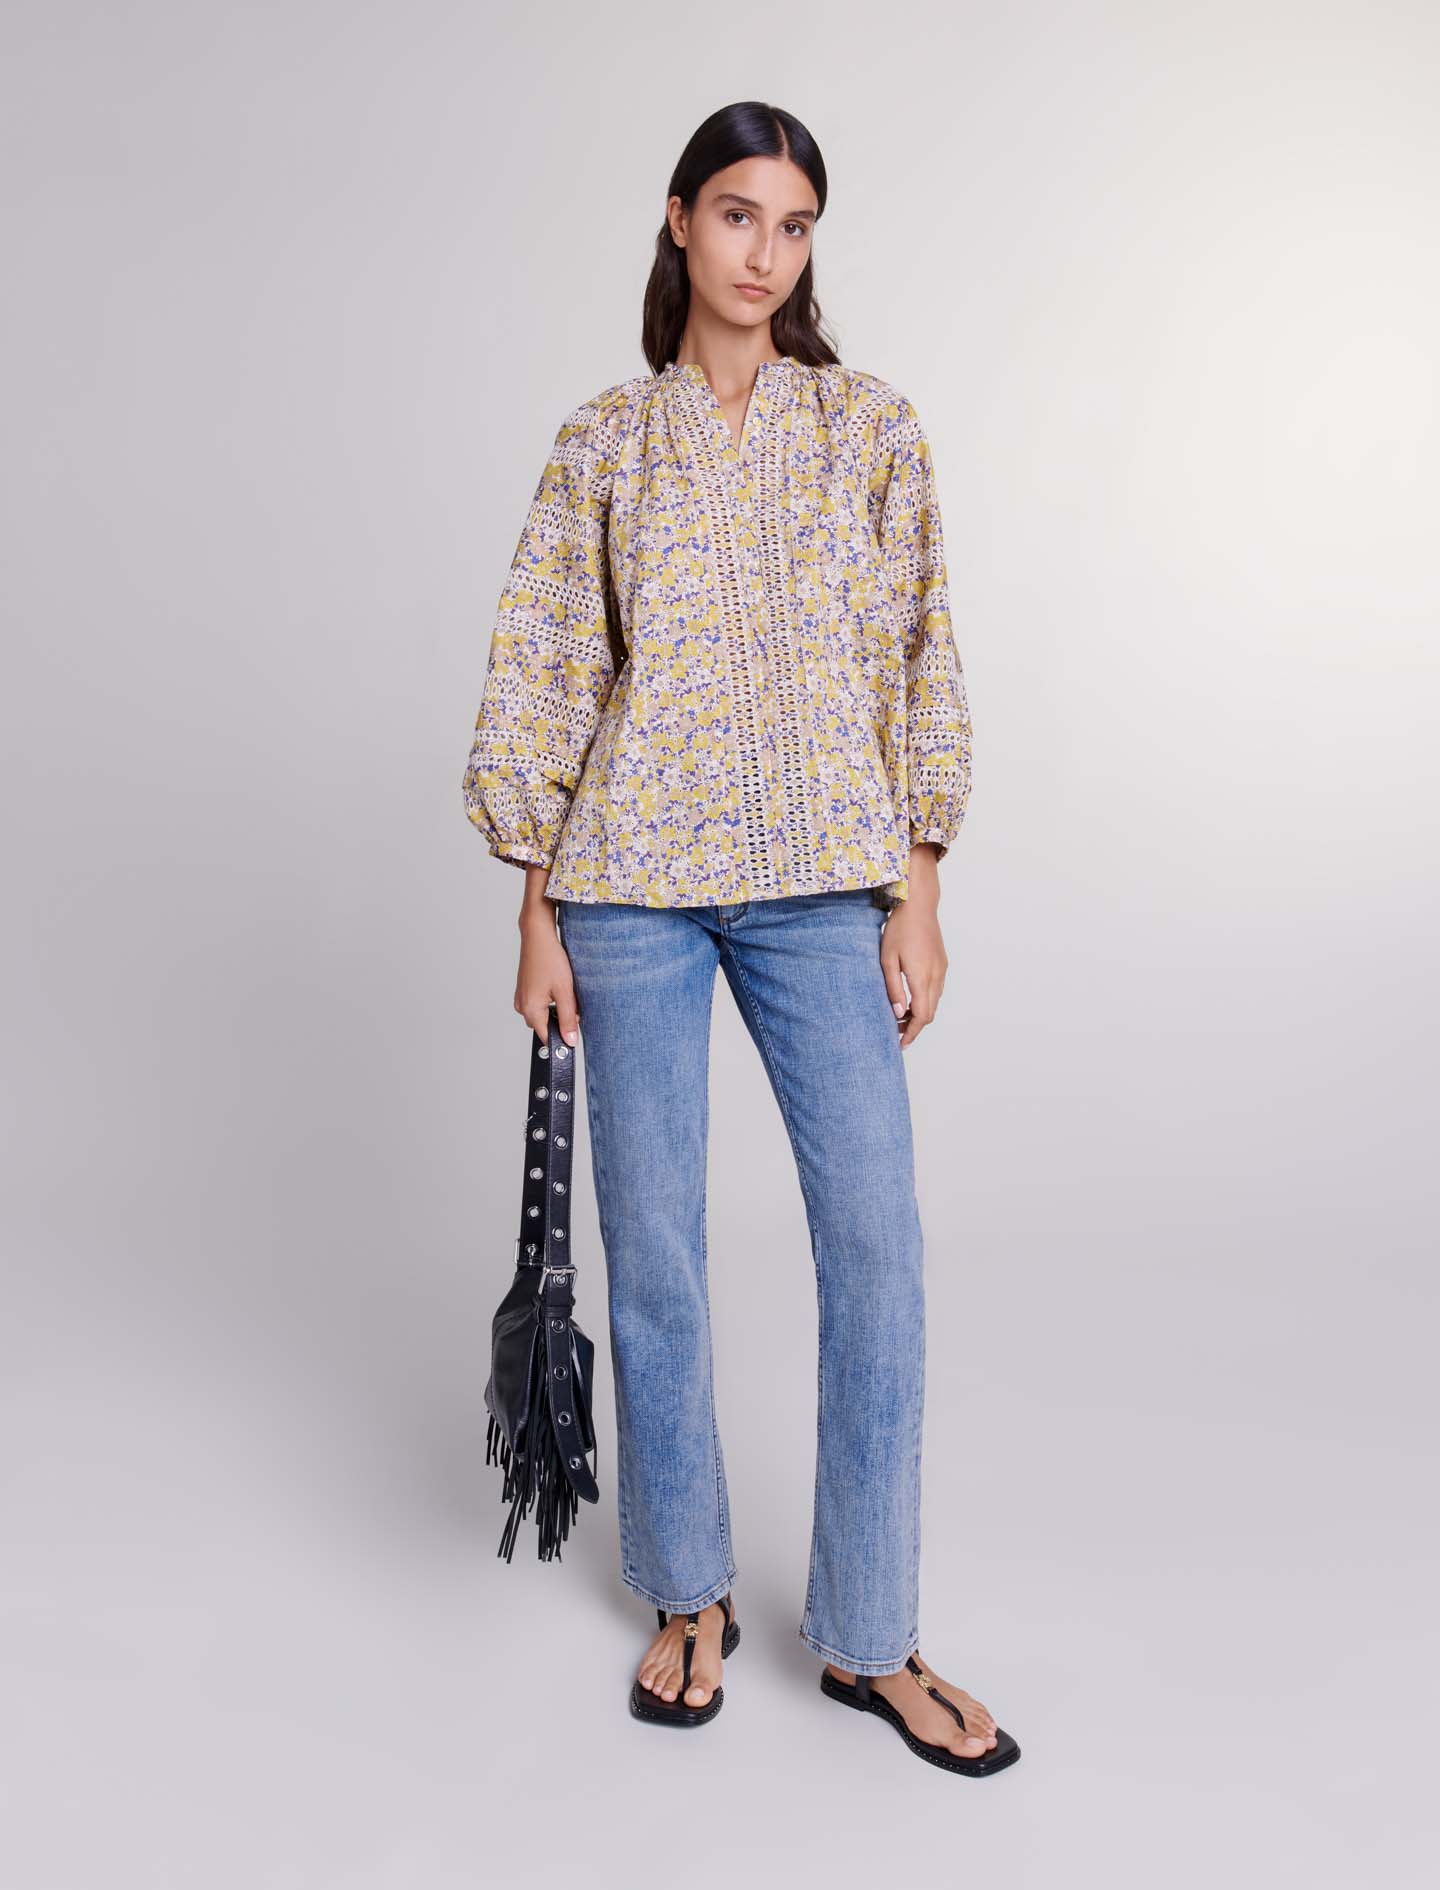 Mixte's cotton Embroidery: Patterned embroidered blouse, size Mixte-Tops & Shirts-US L / FR 3, in color Embroided Flowers Beige Print /